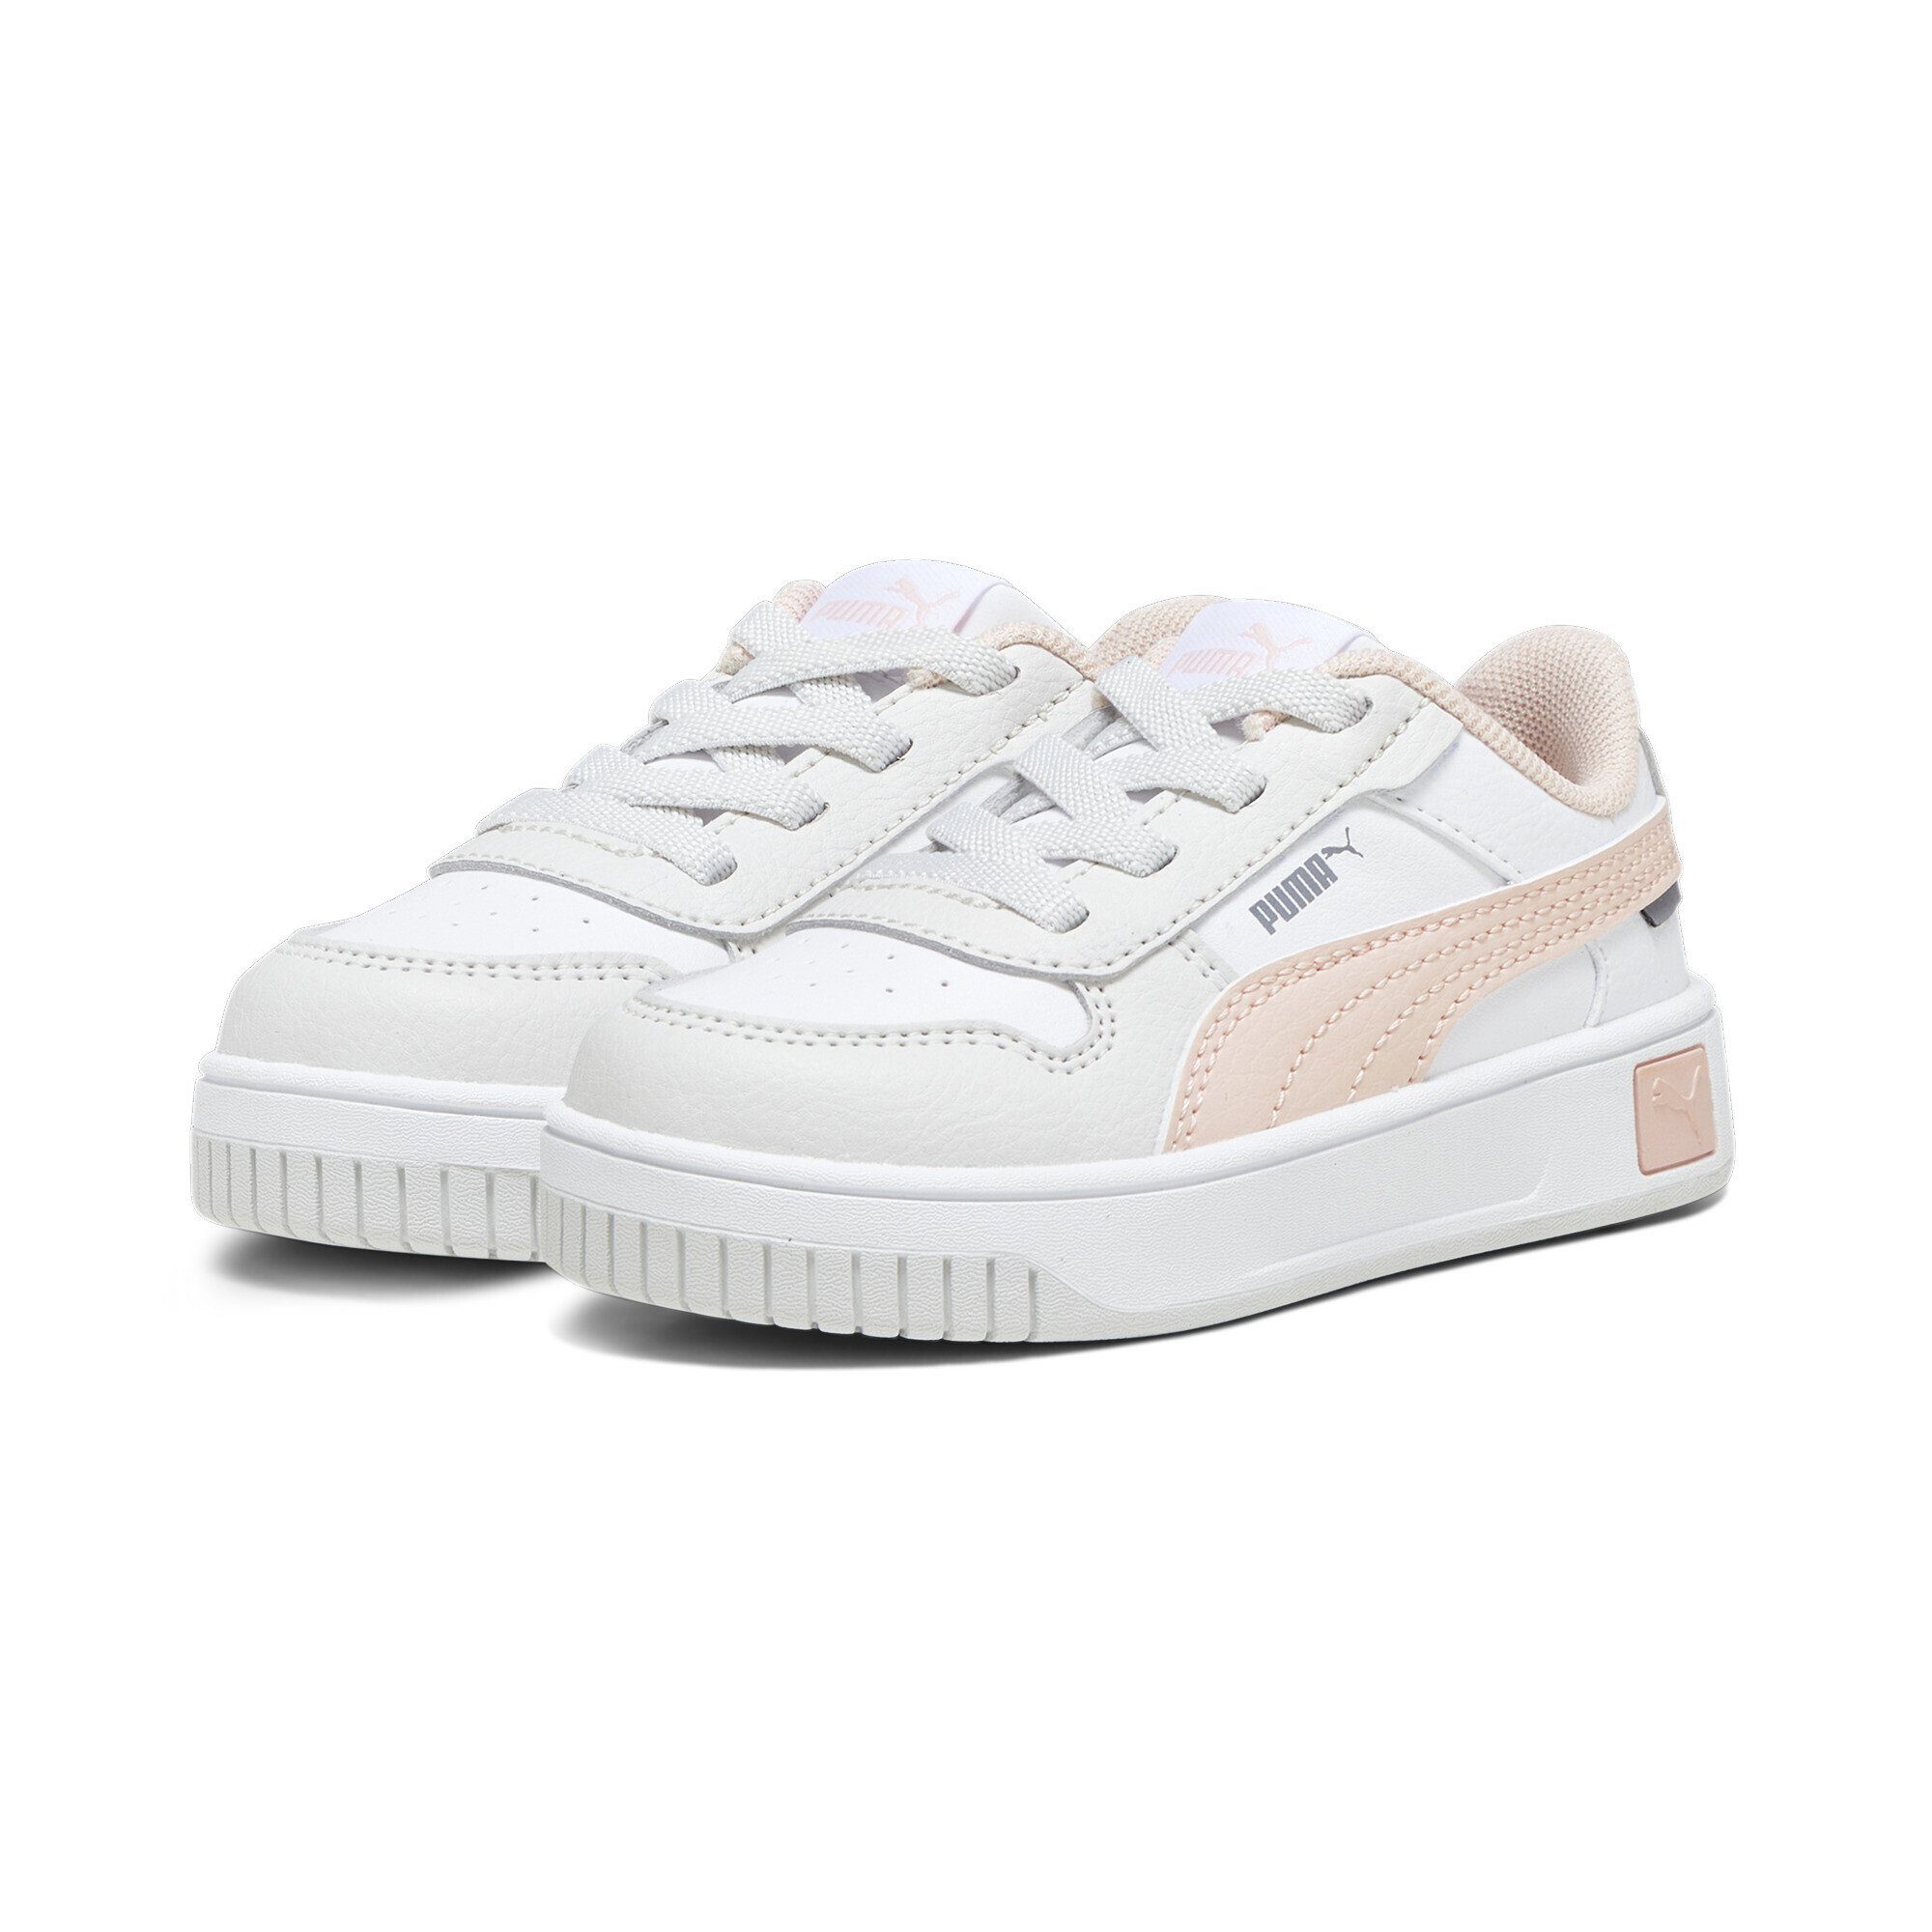 PUMA Carina Street Sneakers Mädchen Sneaker White Rose Dust Feather Gray Pink